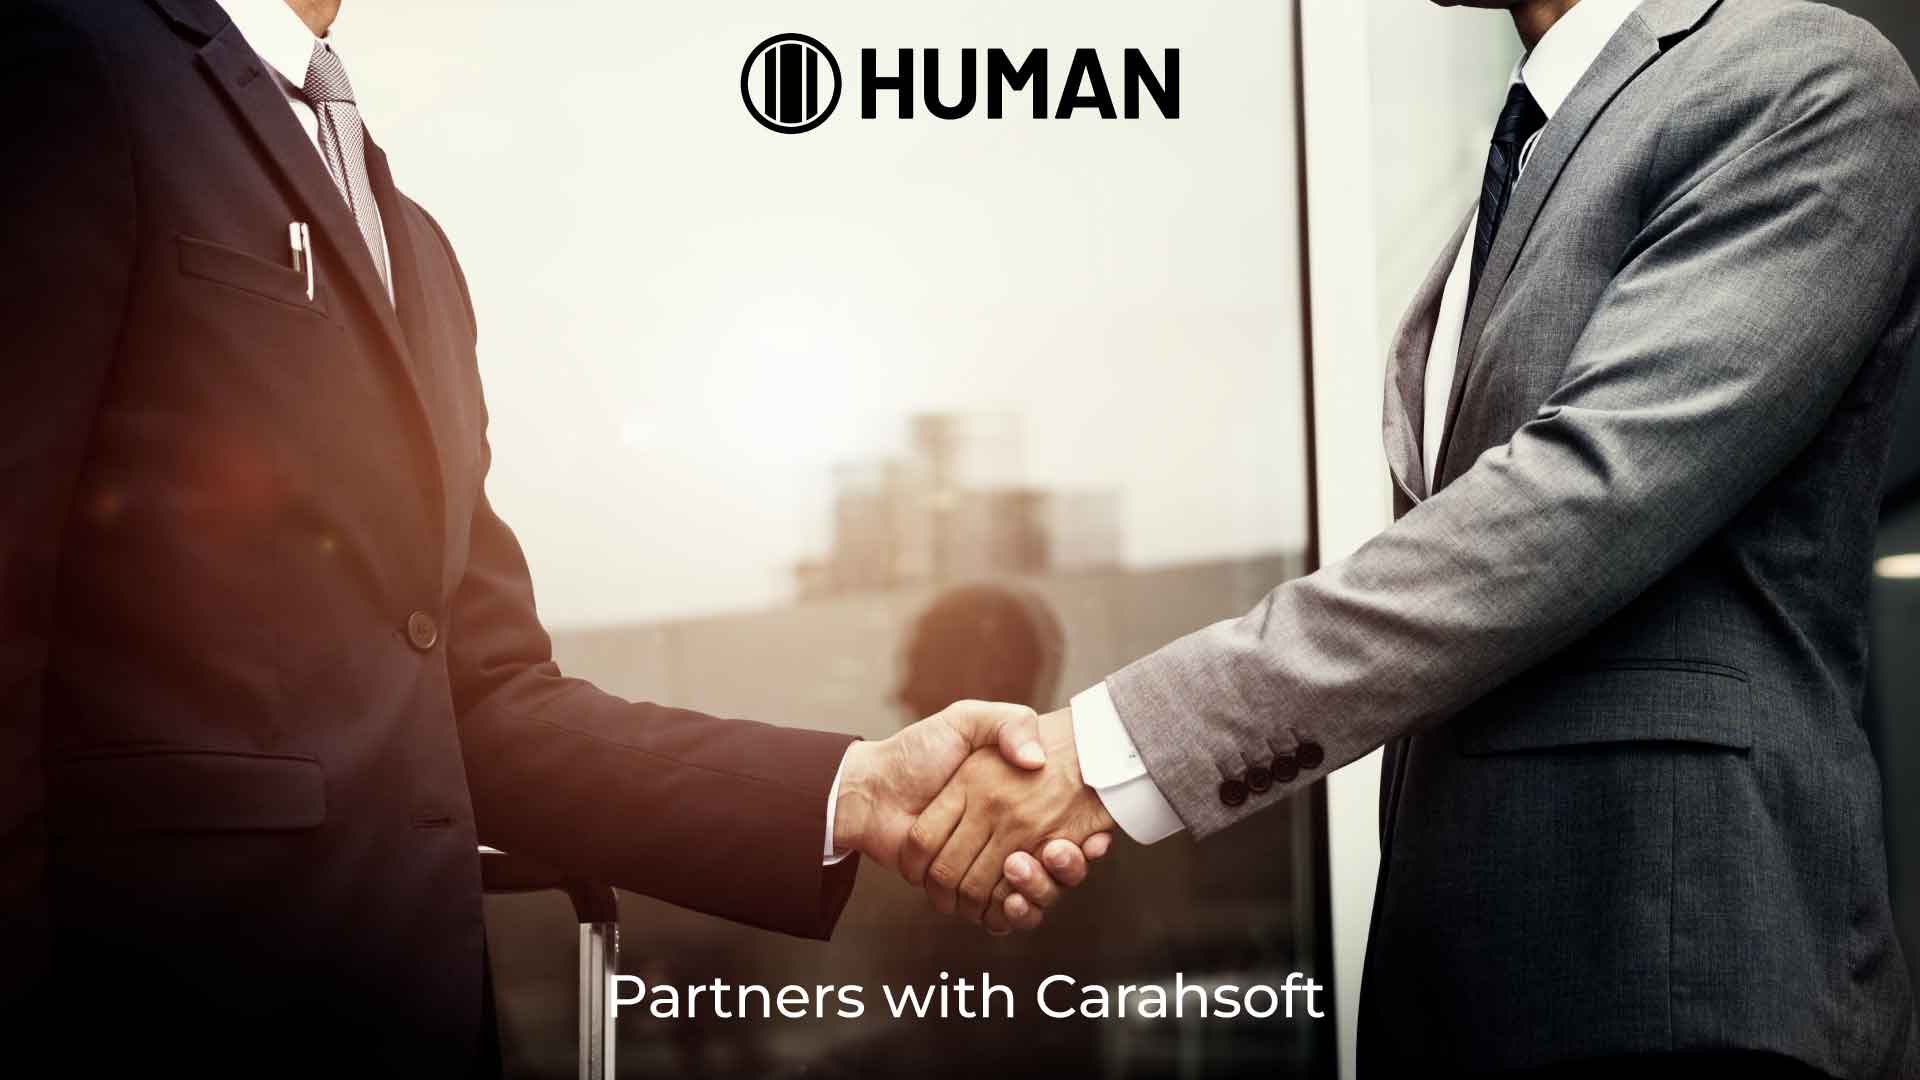 HUMAN Security and Carahsoft Partner to Provide Holistic Digital Attack Defense and World Class Threat Intelligence to the Public Sector